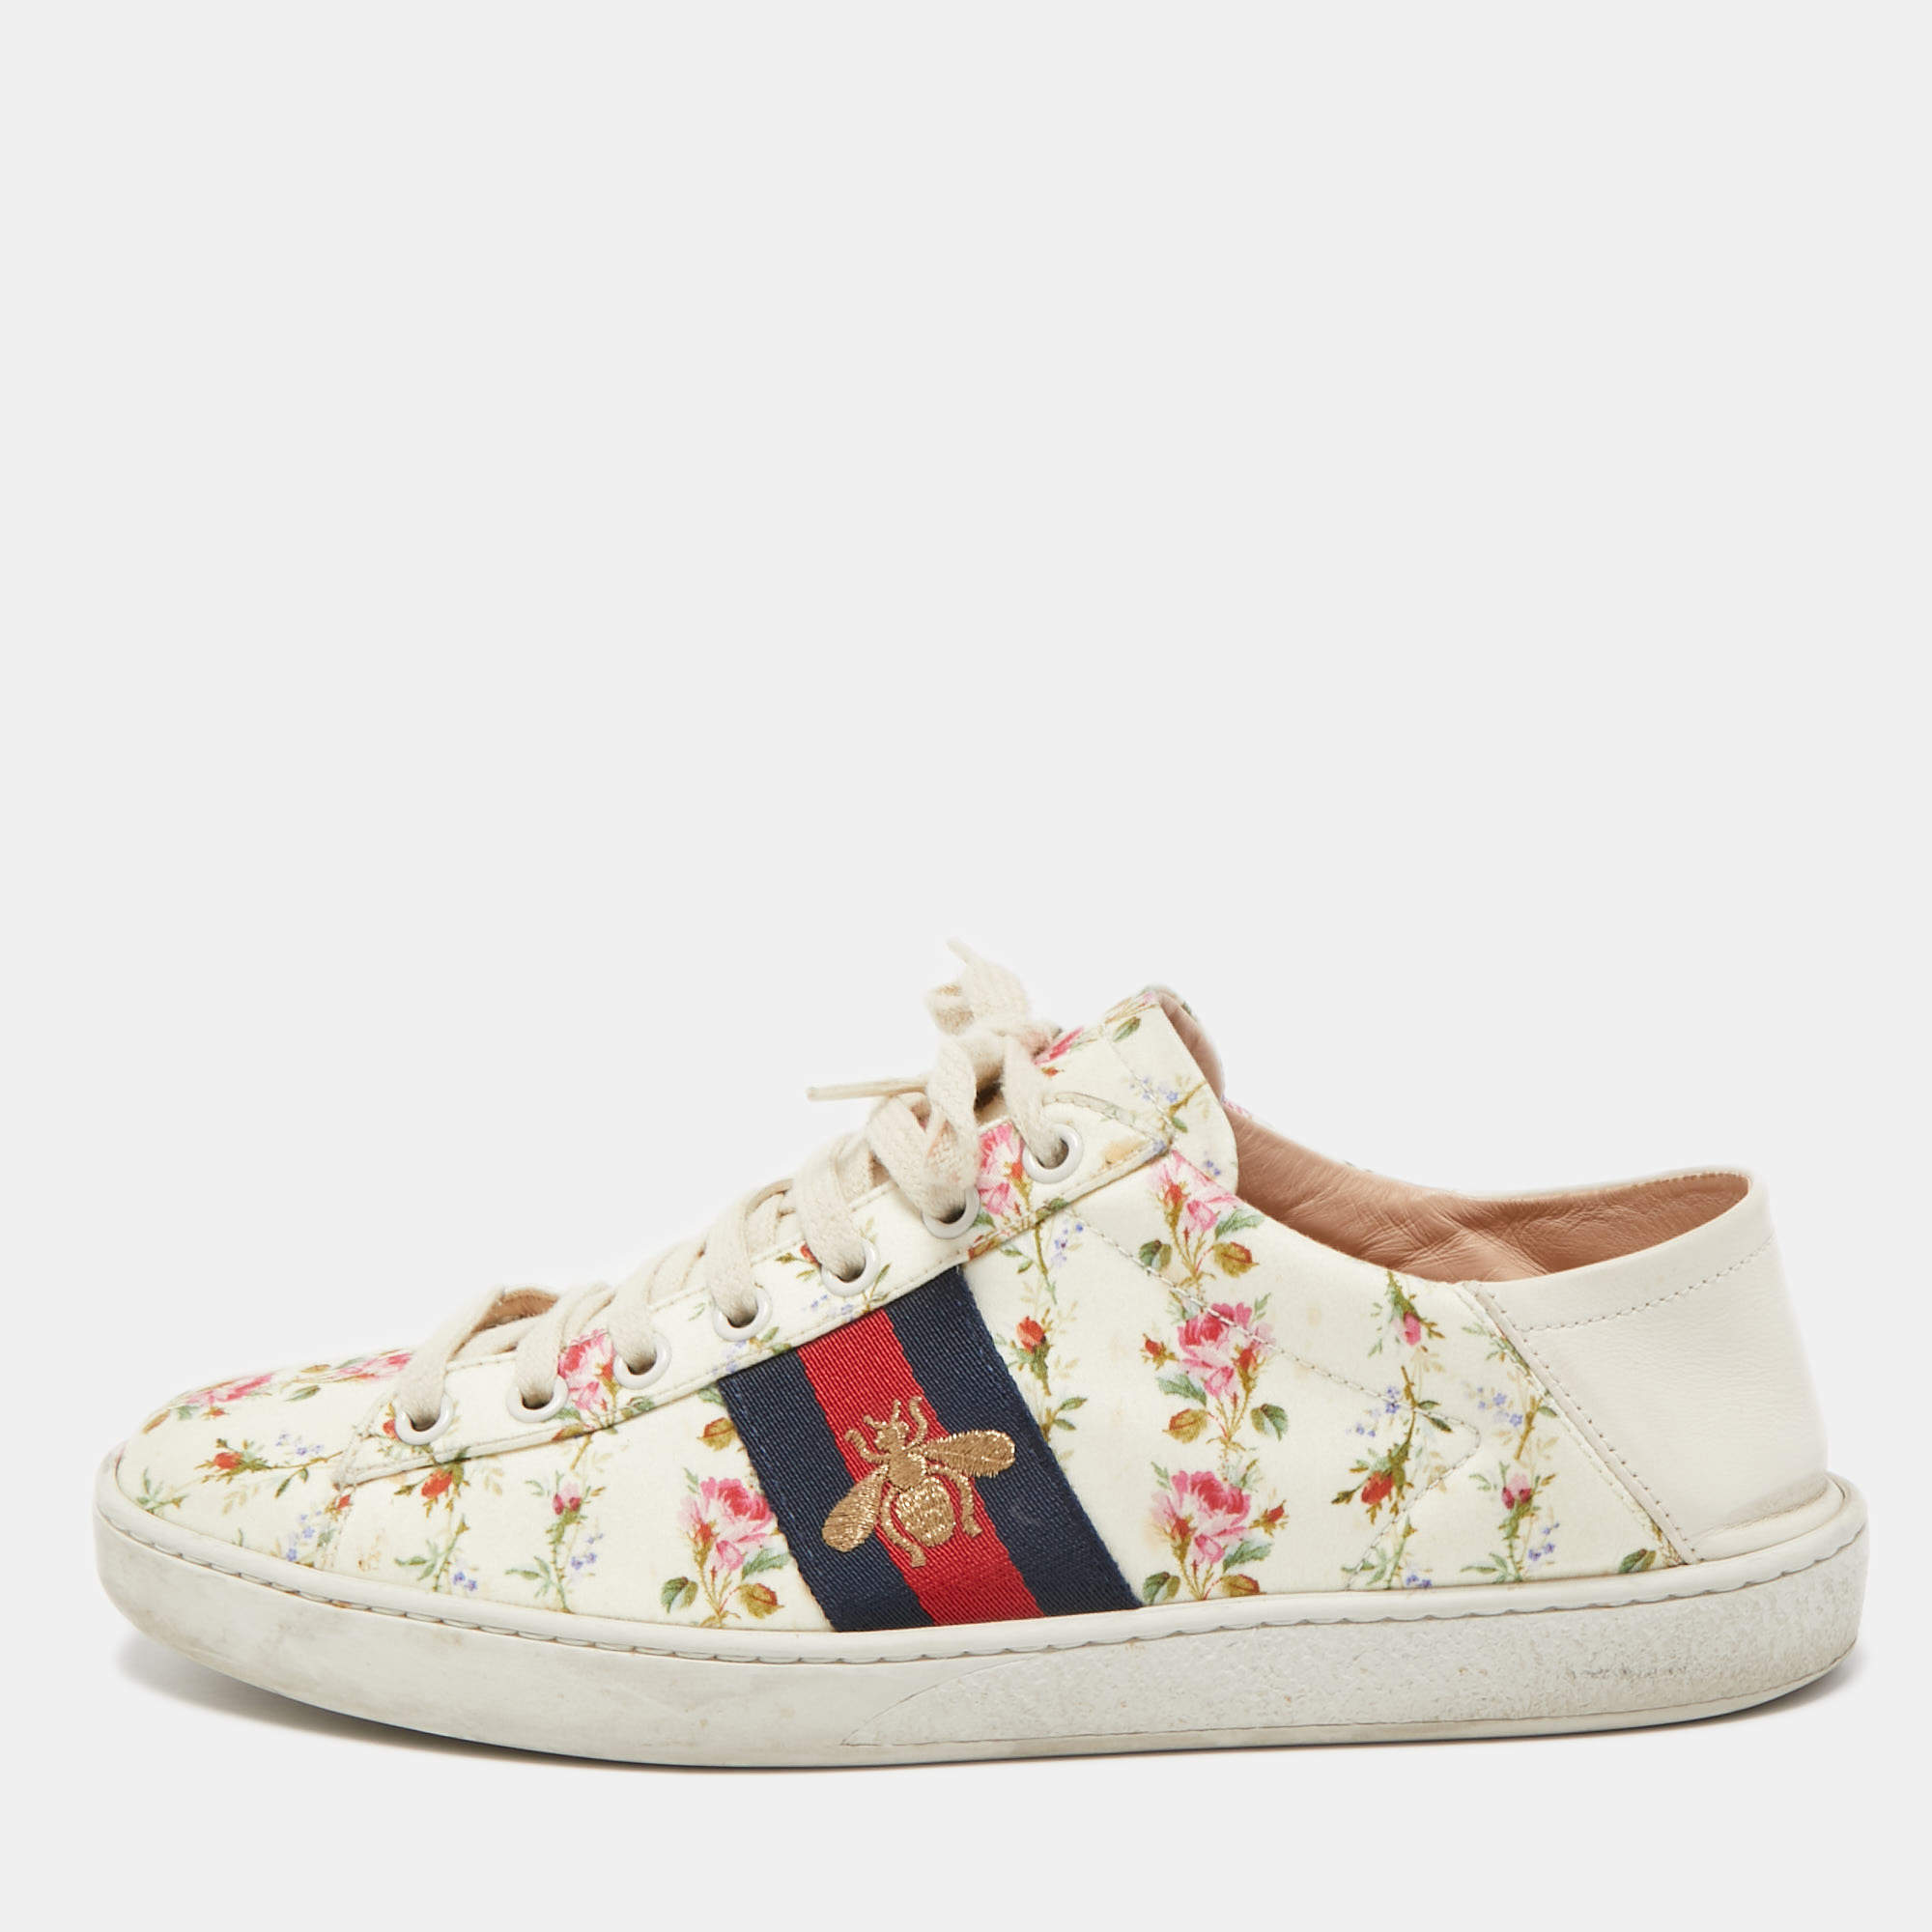 Discover more than 161 gucci flower sneakers best